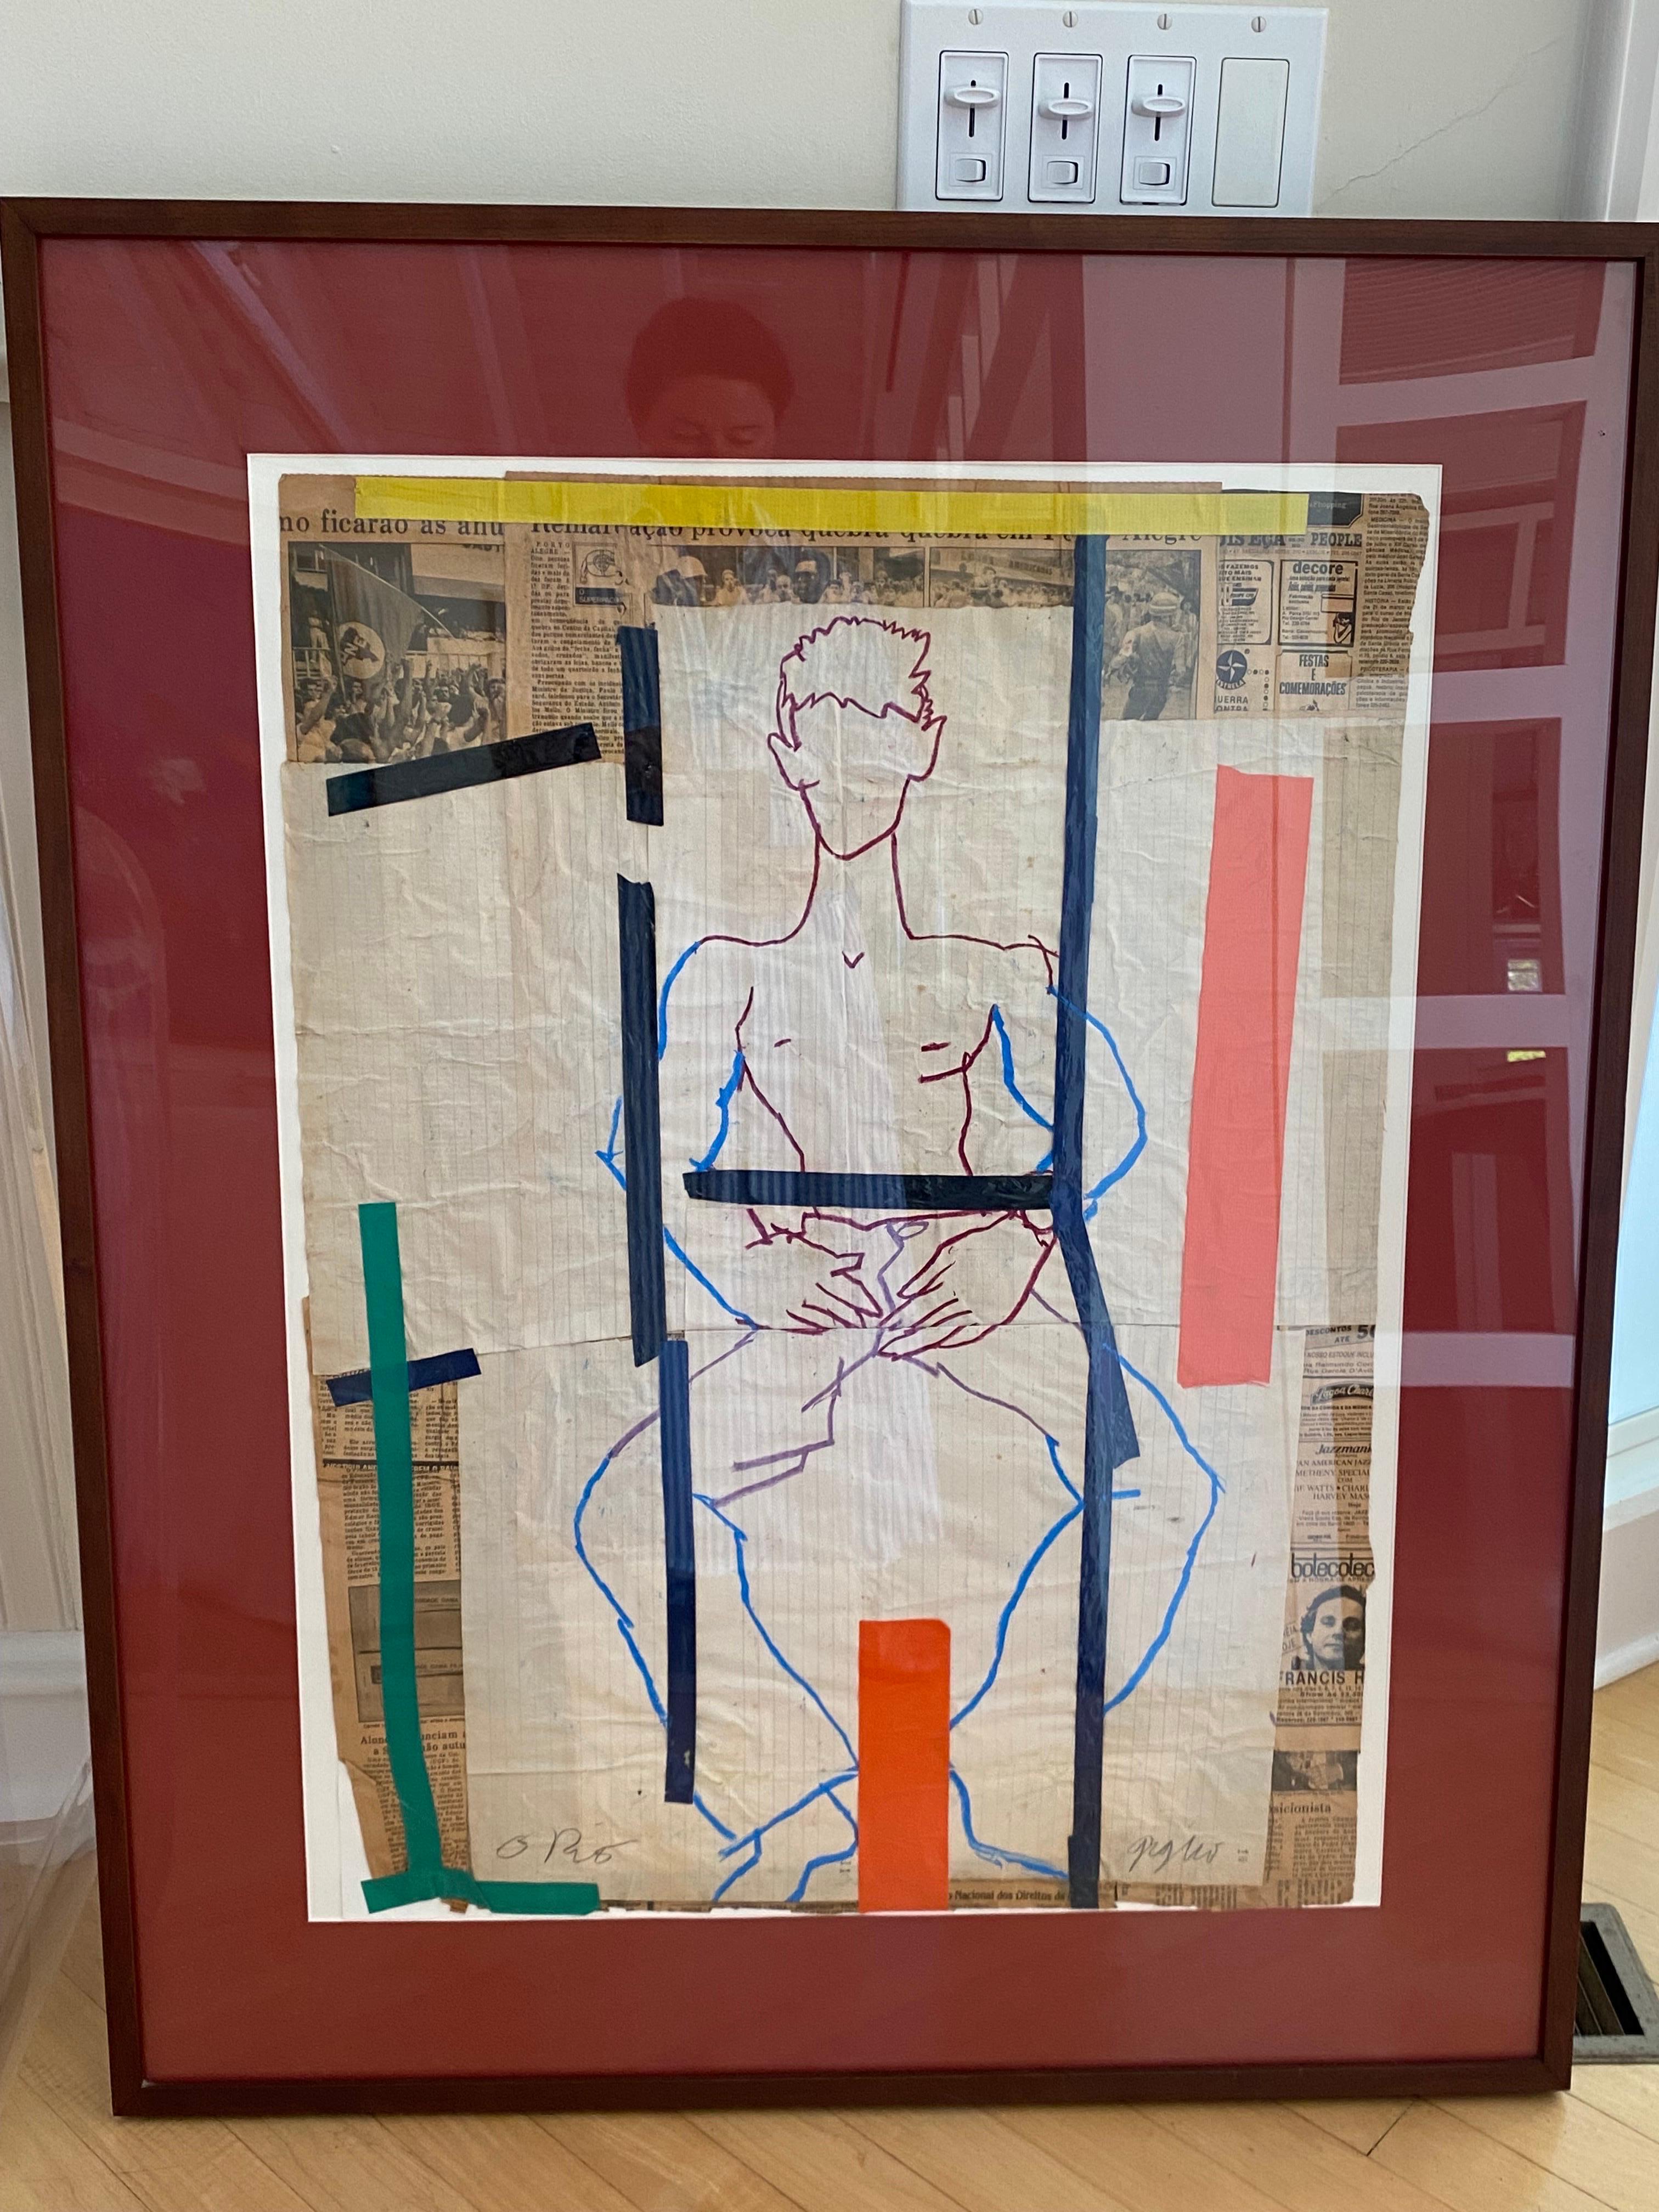 Male Nude mixed media collage by Richard Giglio
For avante-garde, impressionist, and mixed-media enthusiasts alike; Richard Giglio's work encompasses collages, masks, totems, letters, and other pieces and influences. He attributed this personal